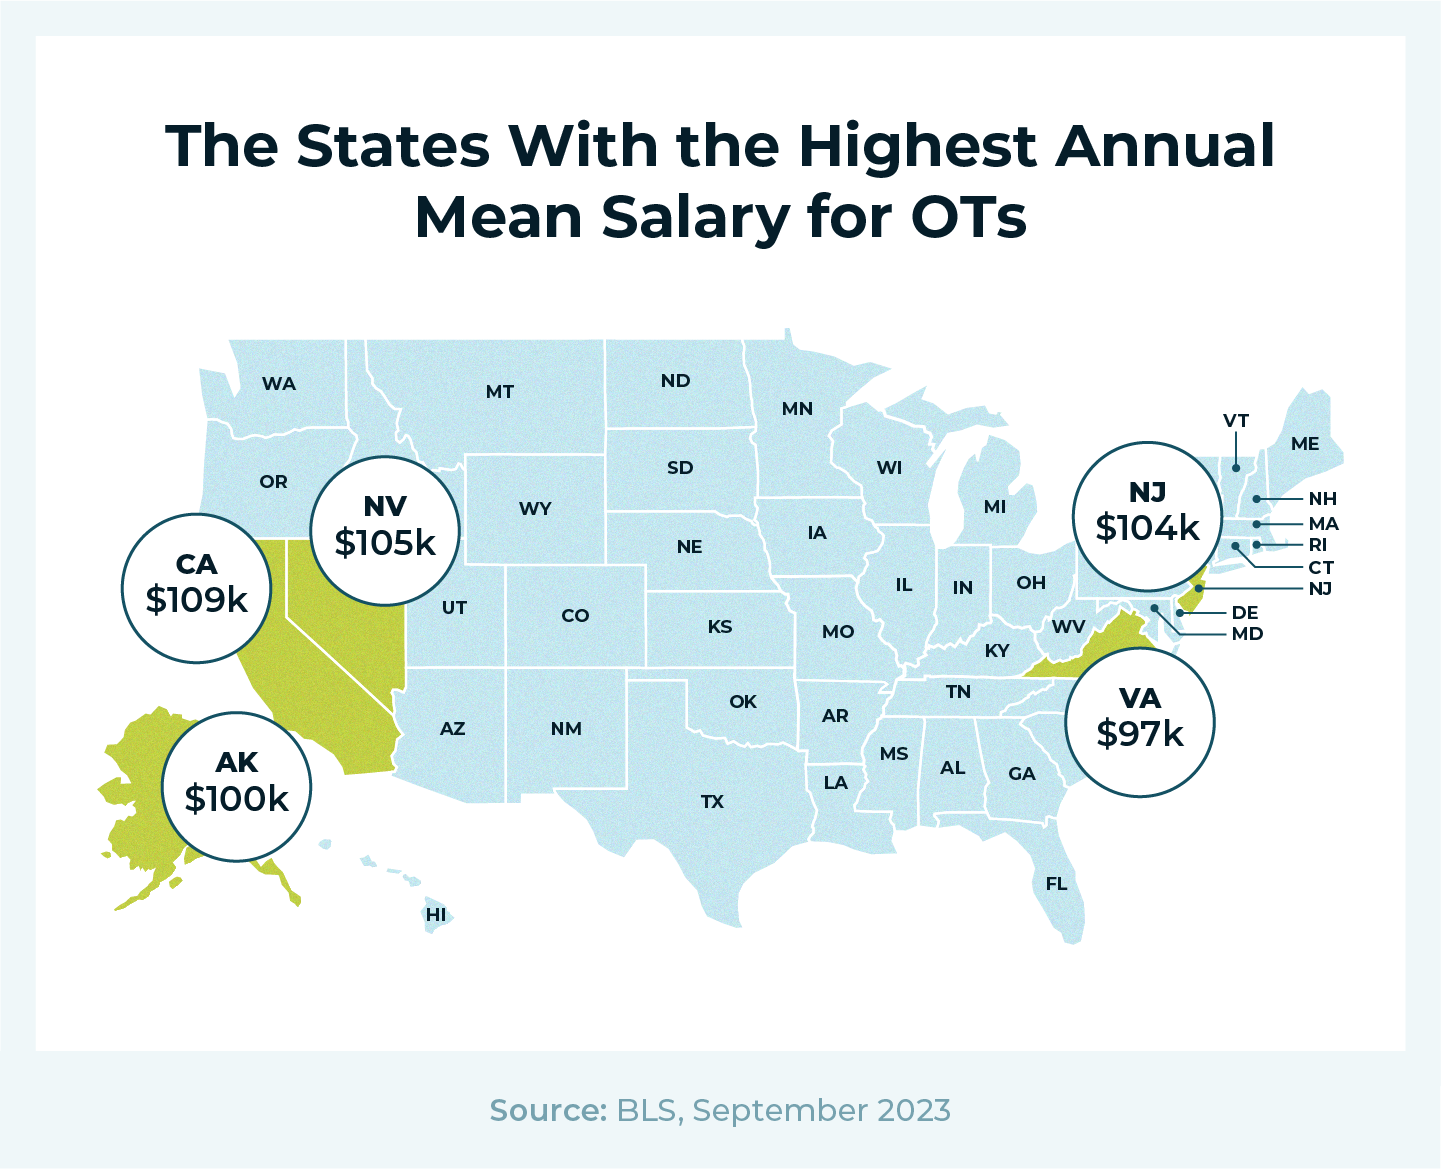 states with the highest annual mean salary for OTs in 2023